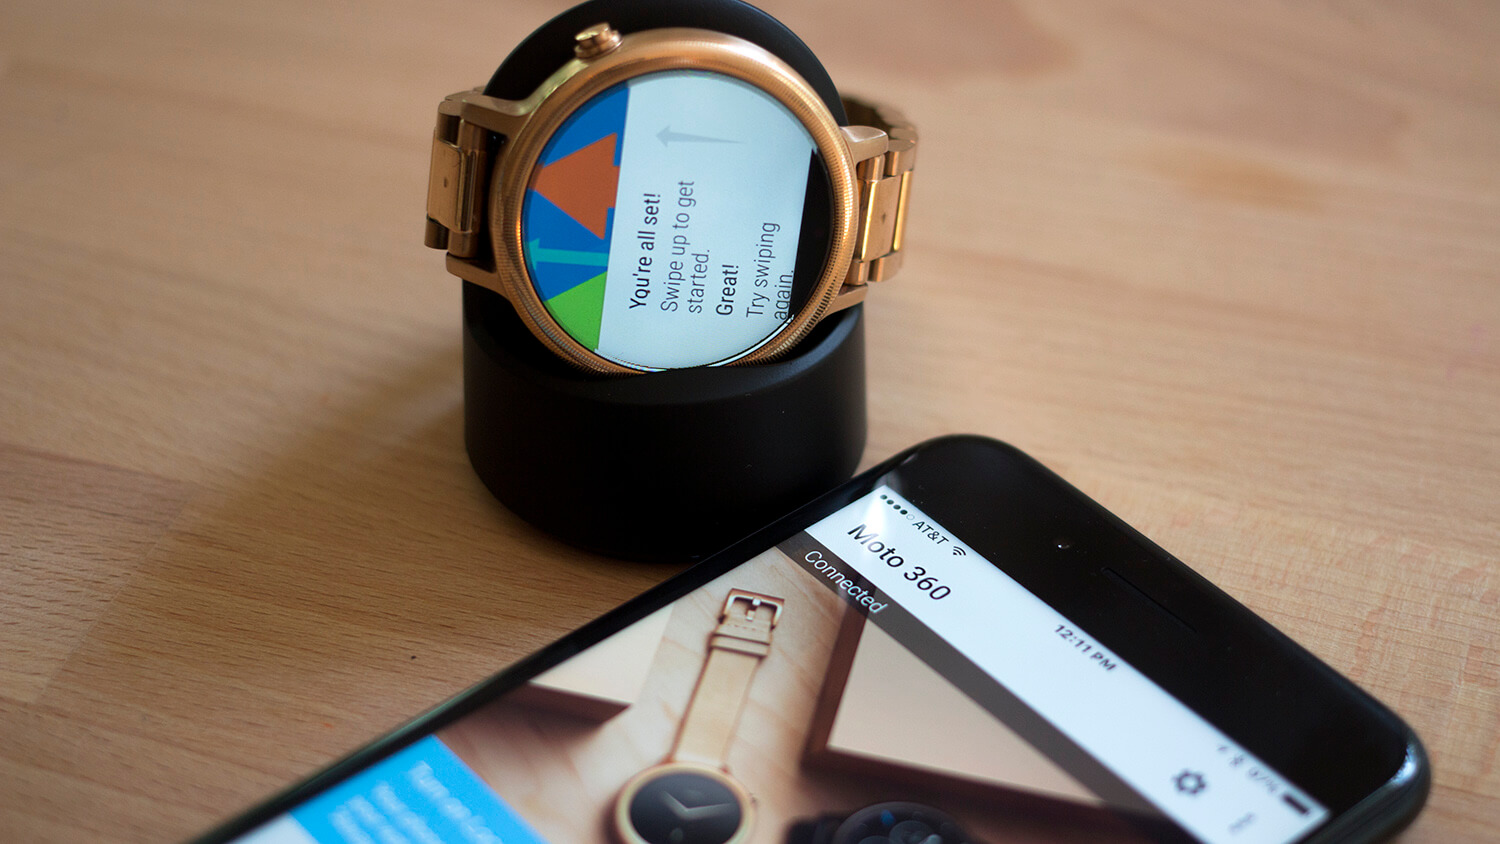 Moto 360 Android Wear iPhone 7 bluetooth connectivity issues